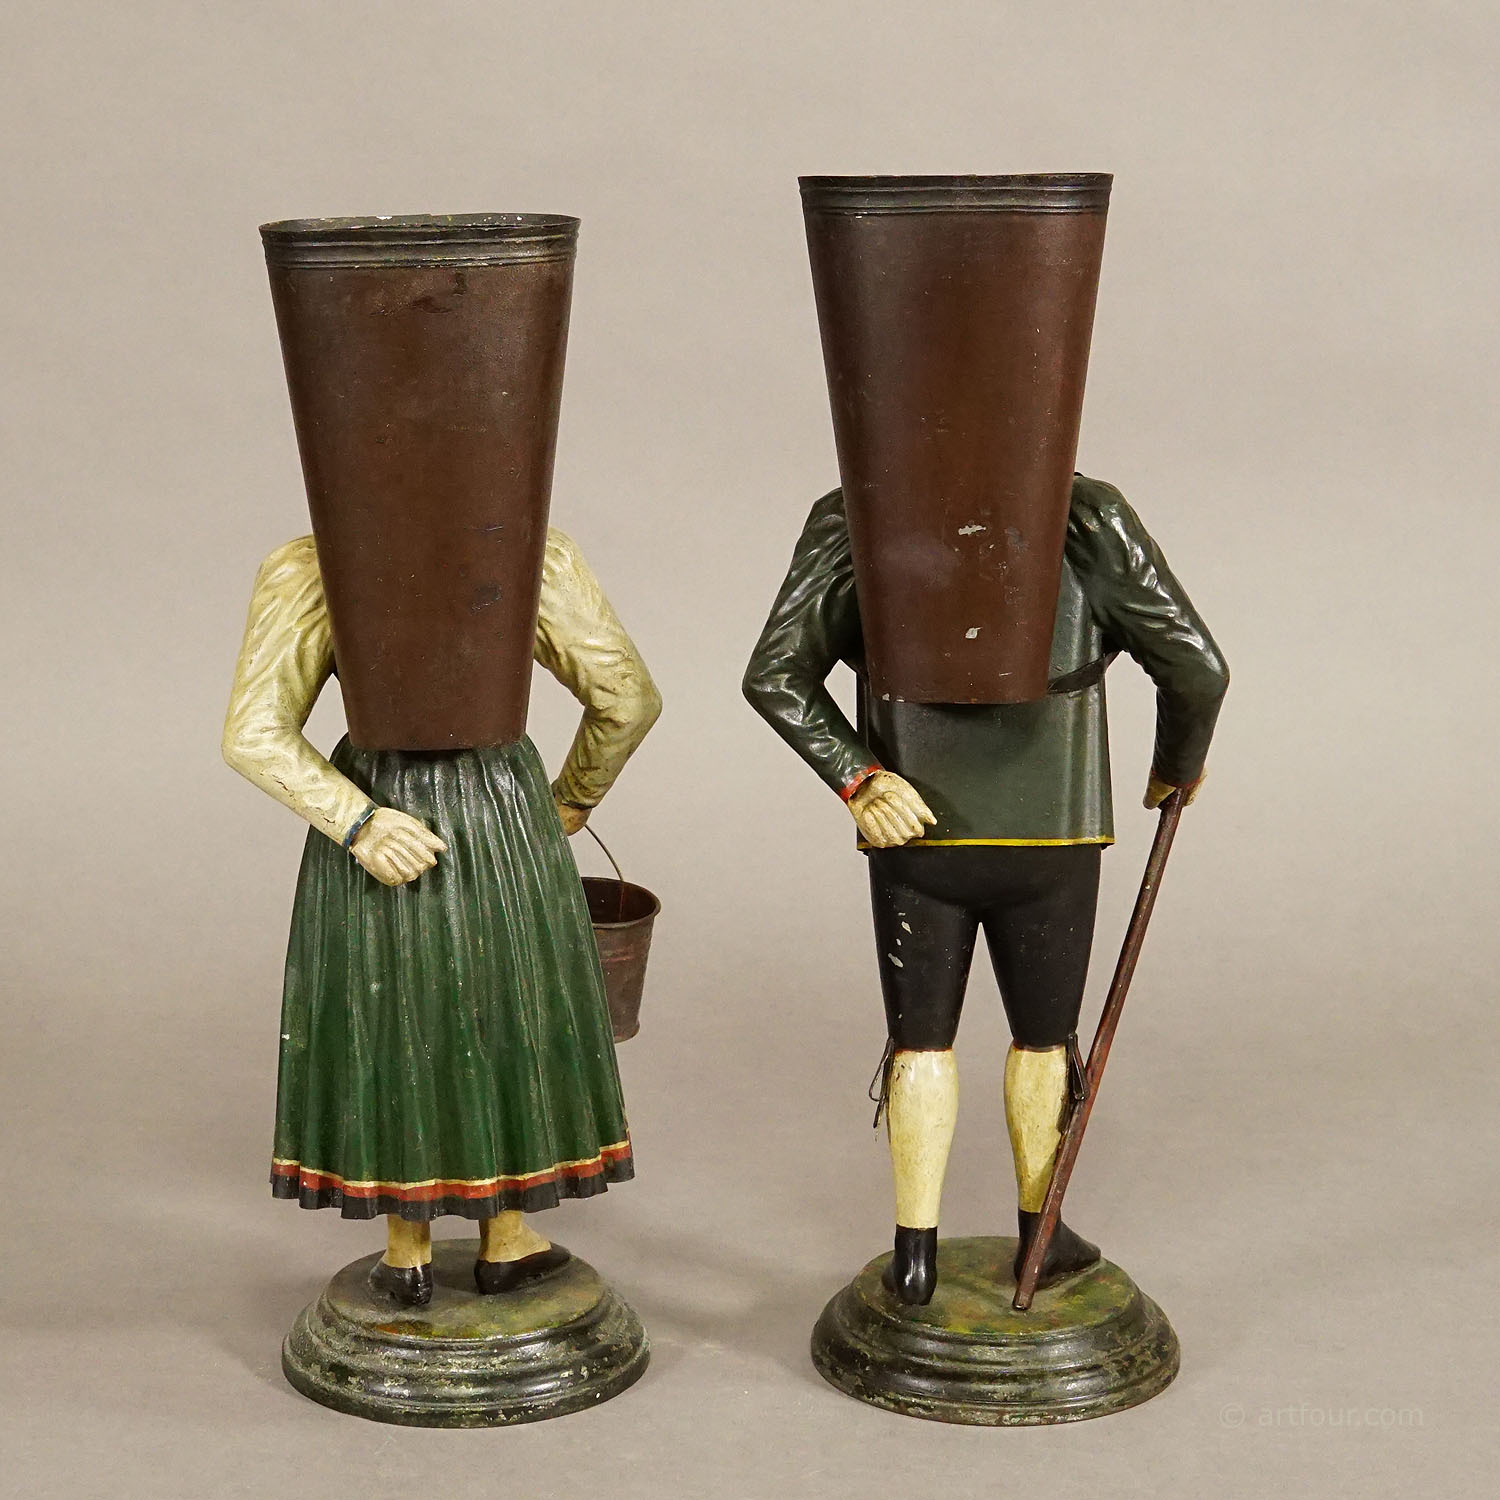 Rare Pair of Tin Figurines Winegrover and Wife with Panniers by J. M. Issmayer ca. 1840s